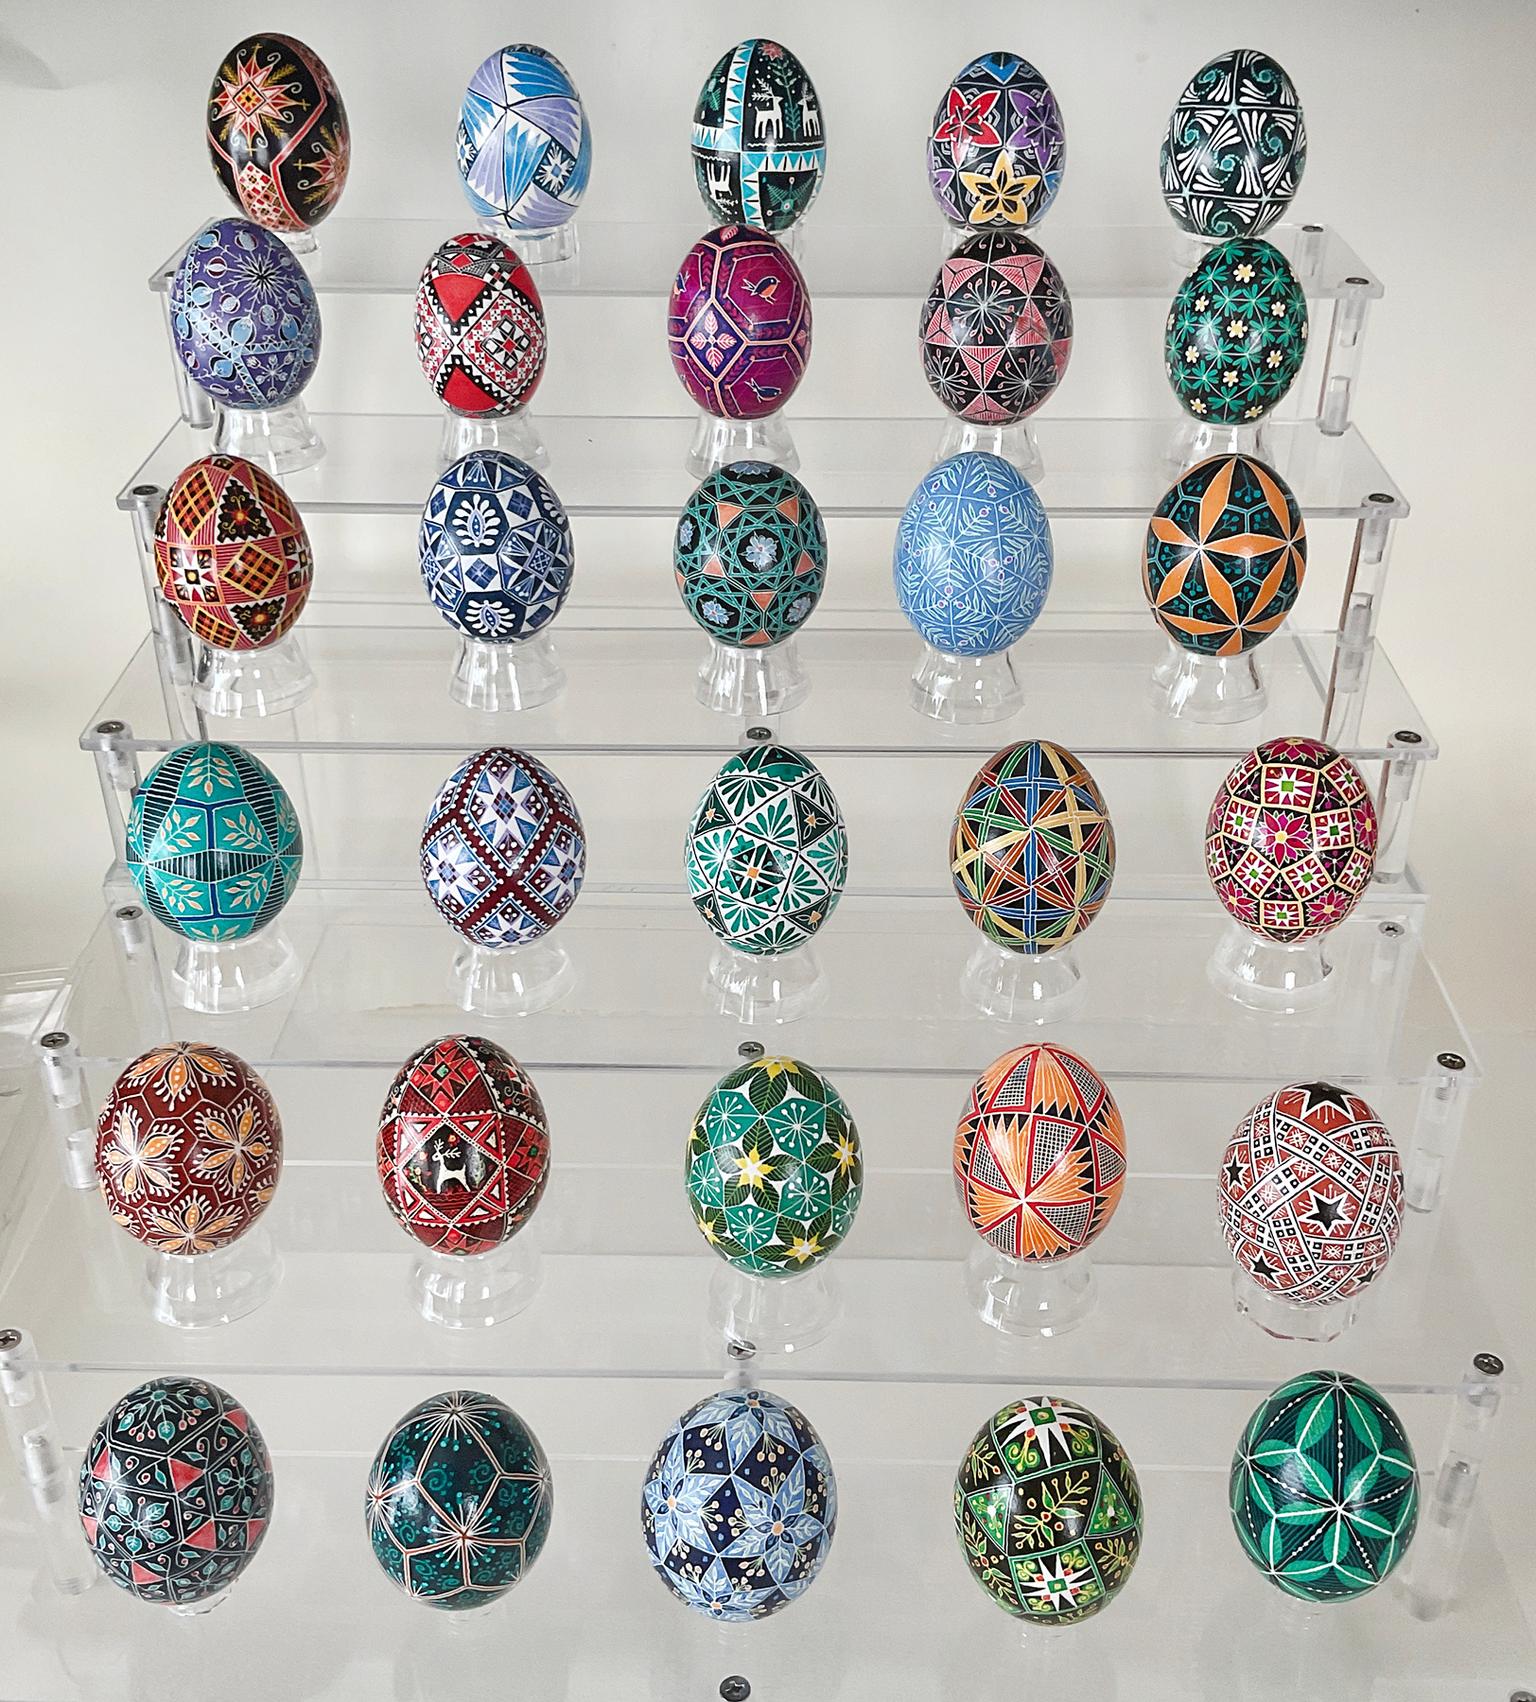 Image for entry 'Polyhedral Pysanky Group'